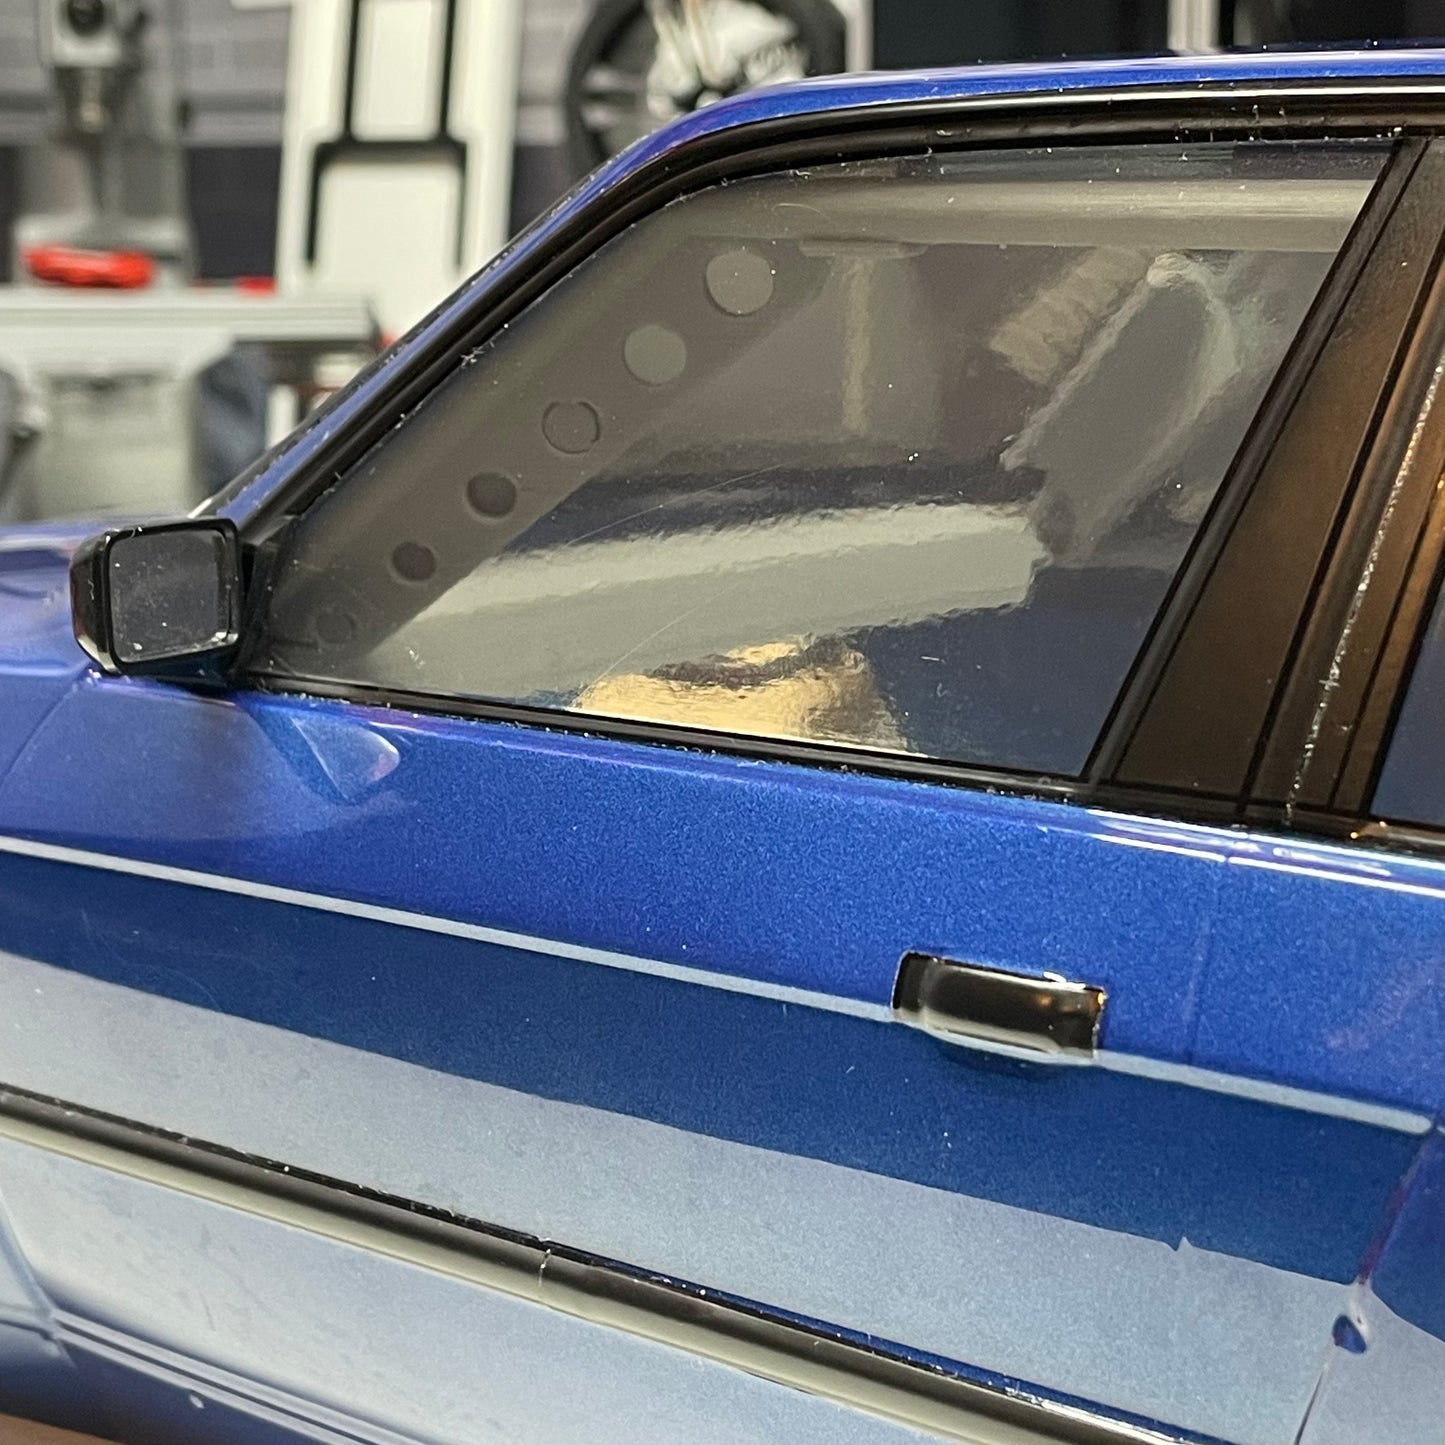 1/10 Scale One Piece Roll Cage for the MST RMX Drift E30 BMW Body